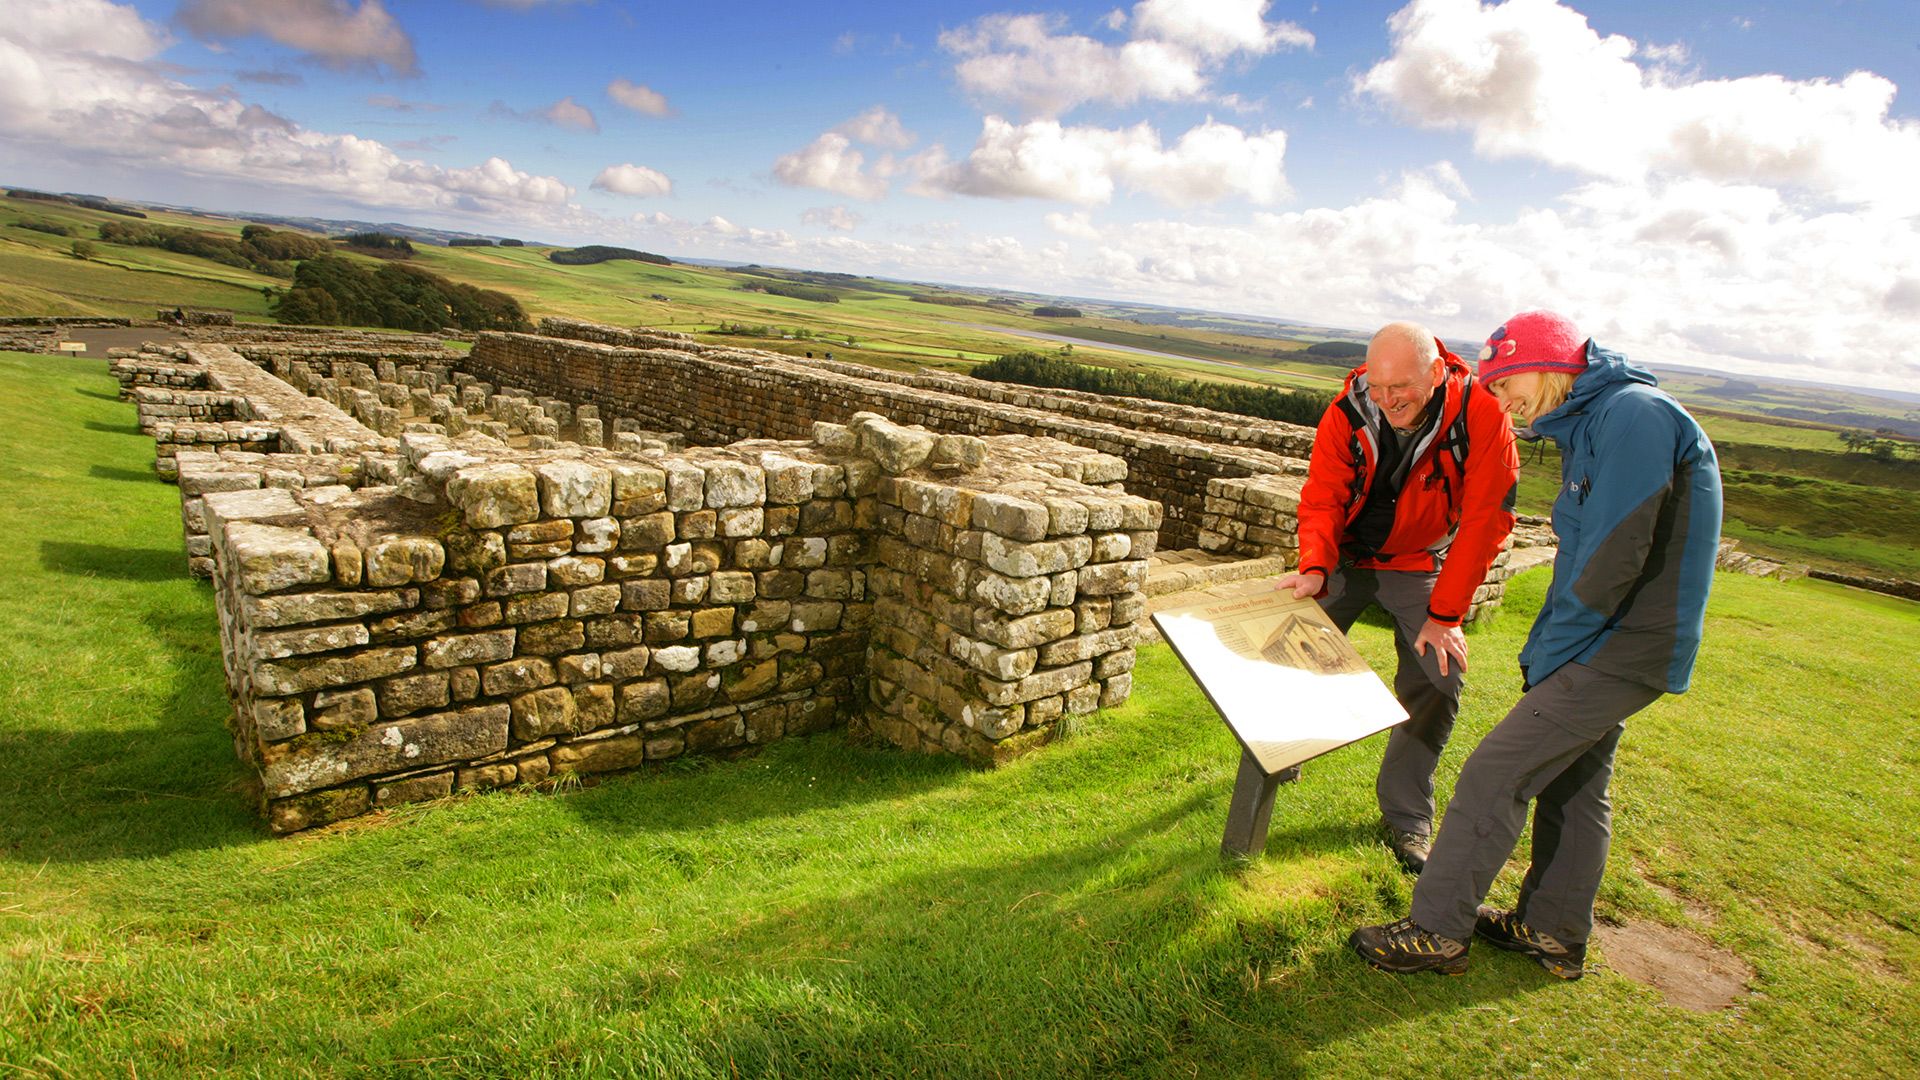 Learning about Housesteads